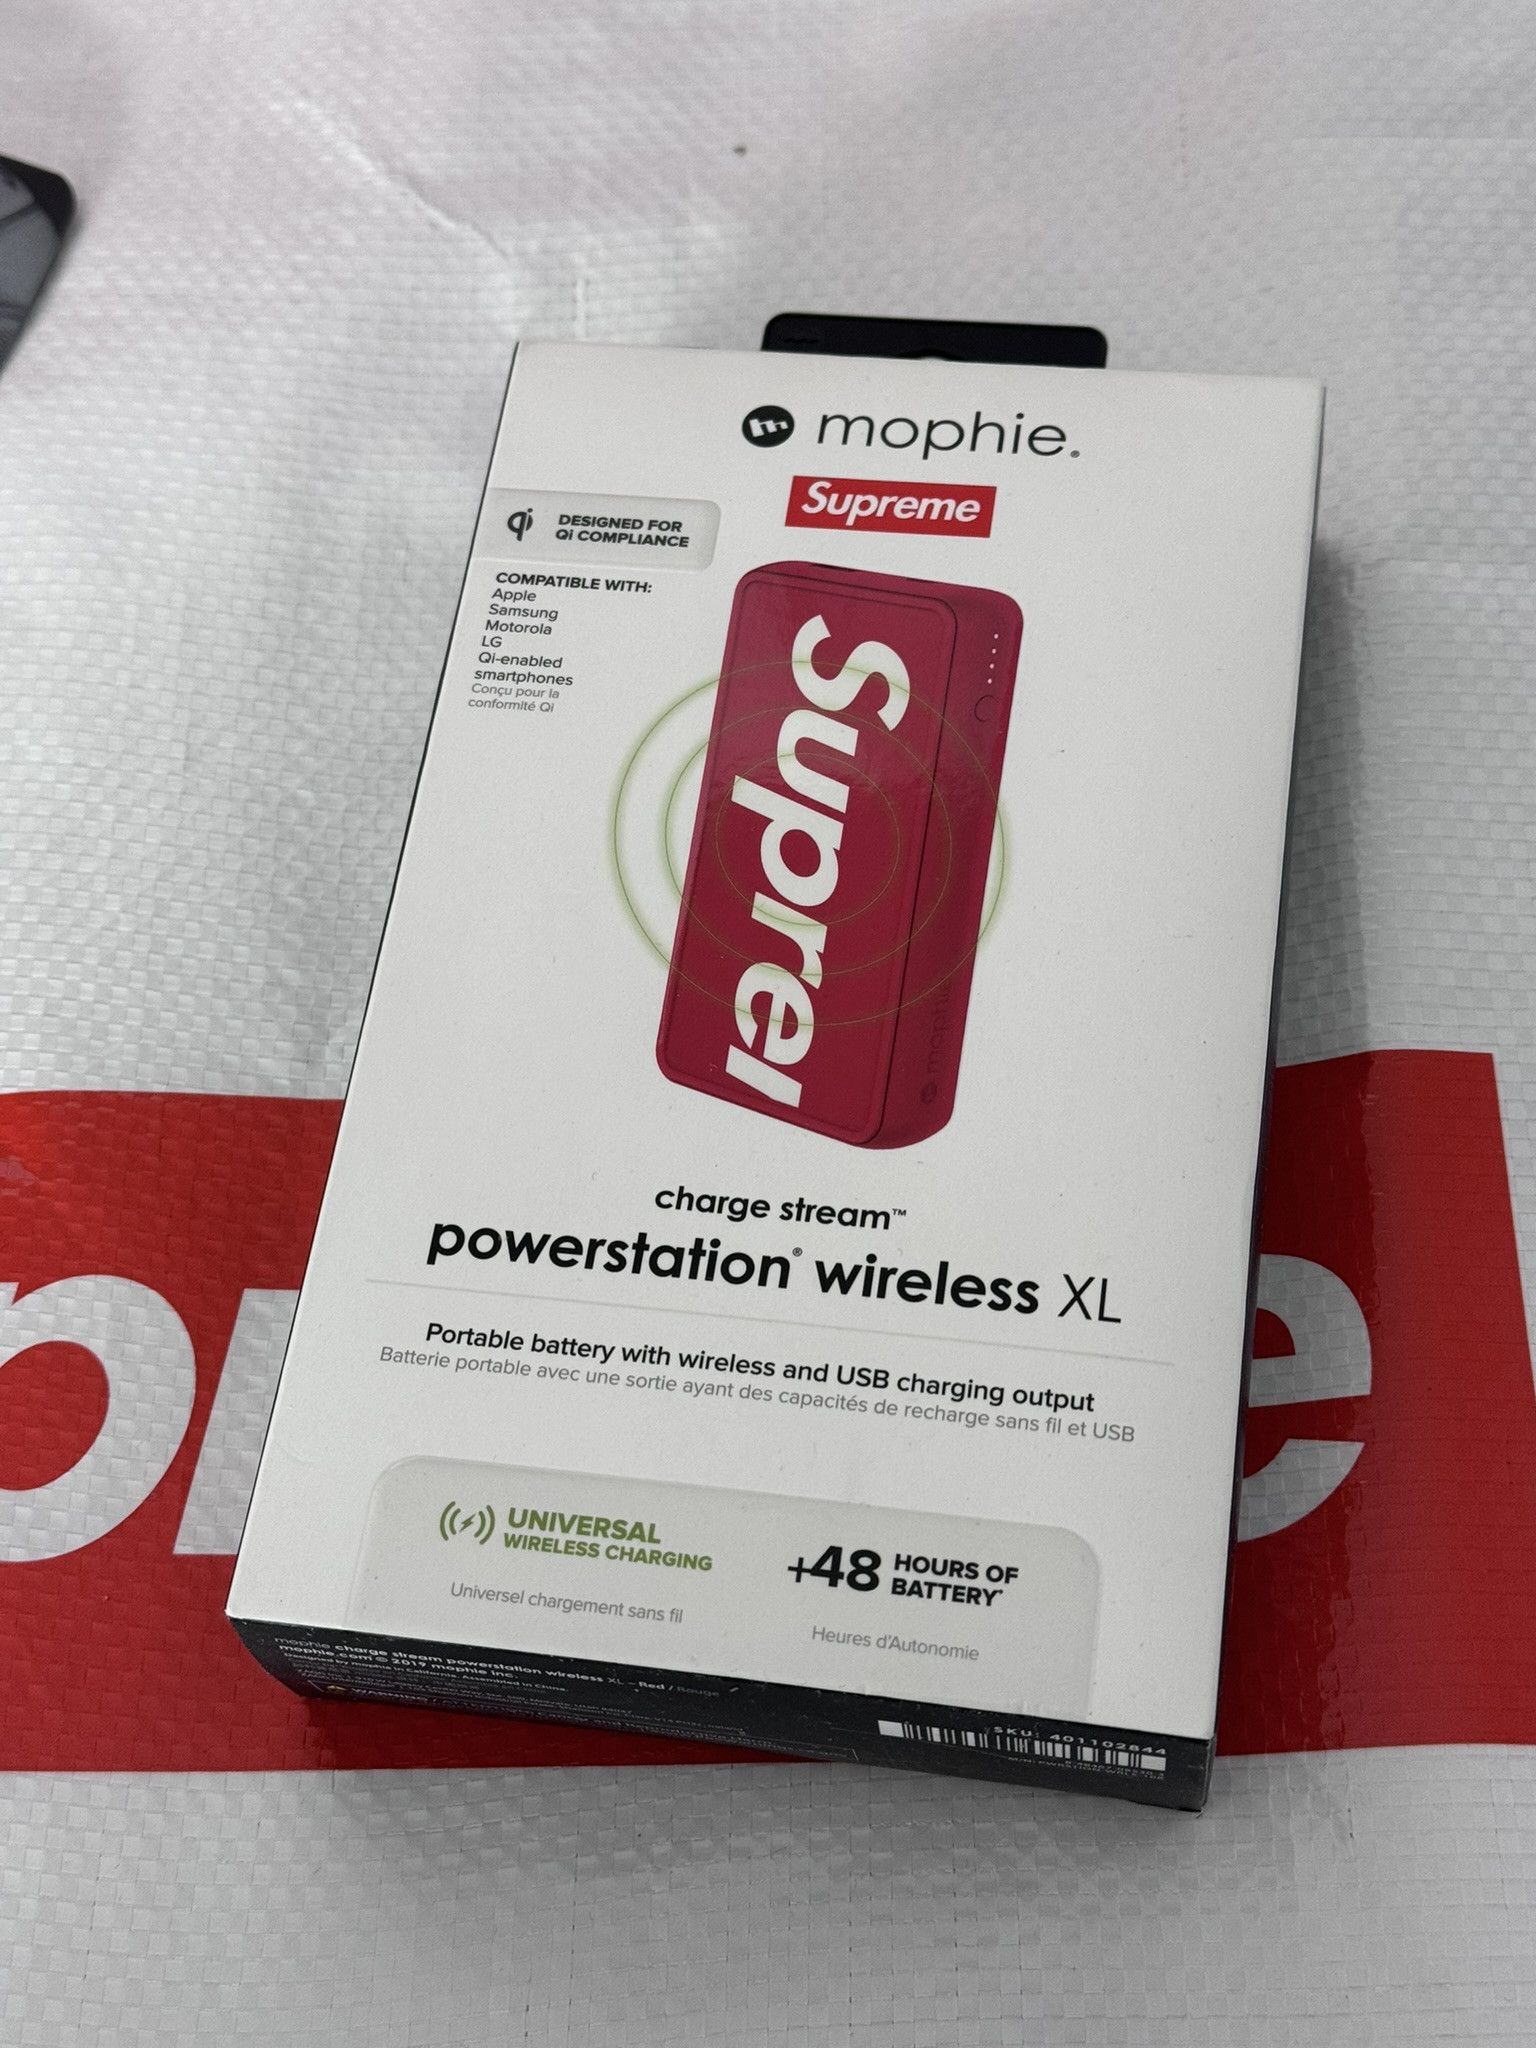 Supreme Supreme Mophie Powerstation Wireless XL Red ss 19 | Grailed